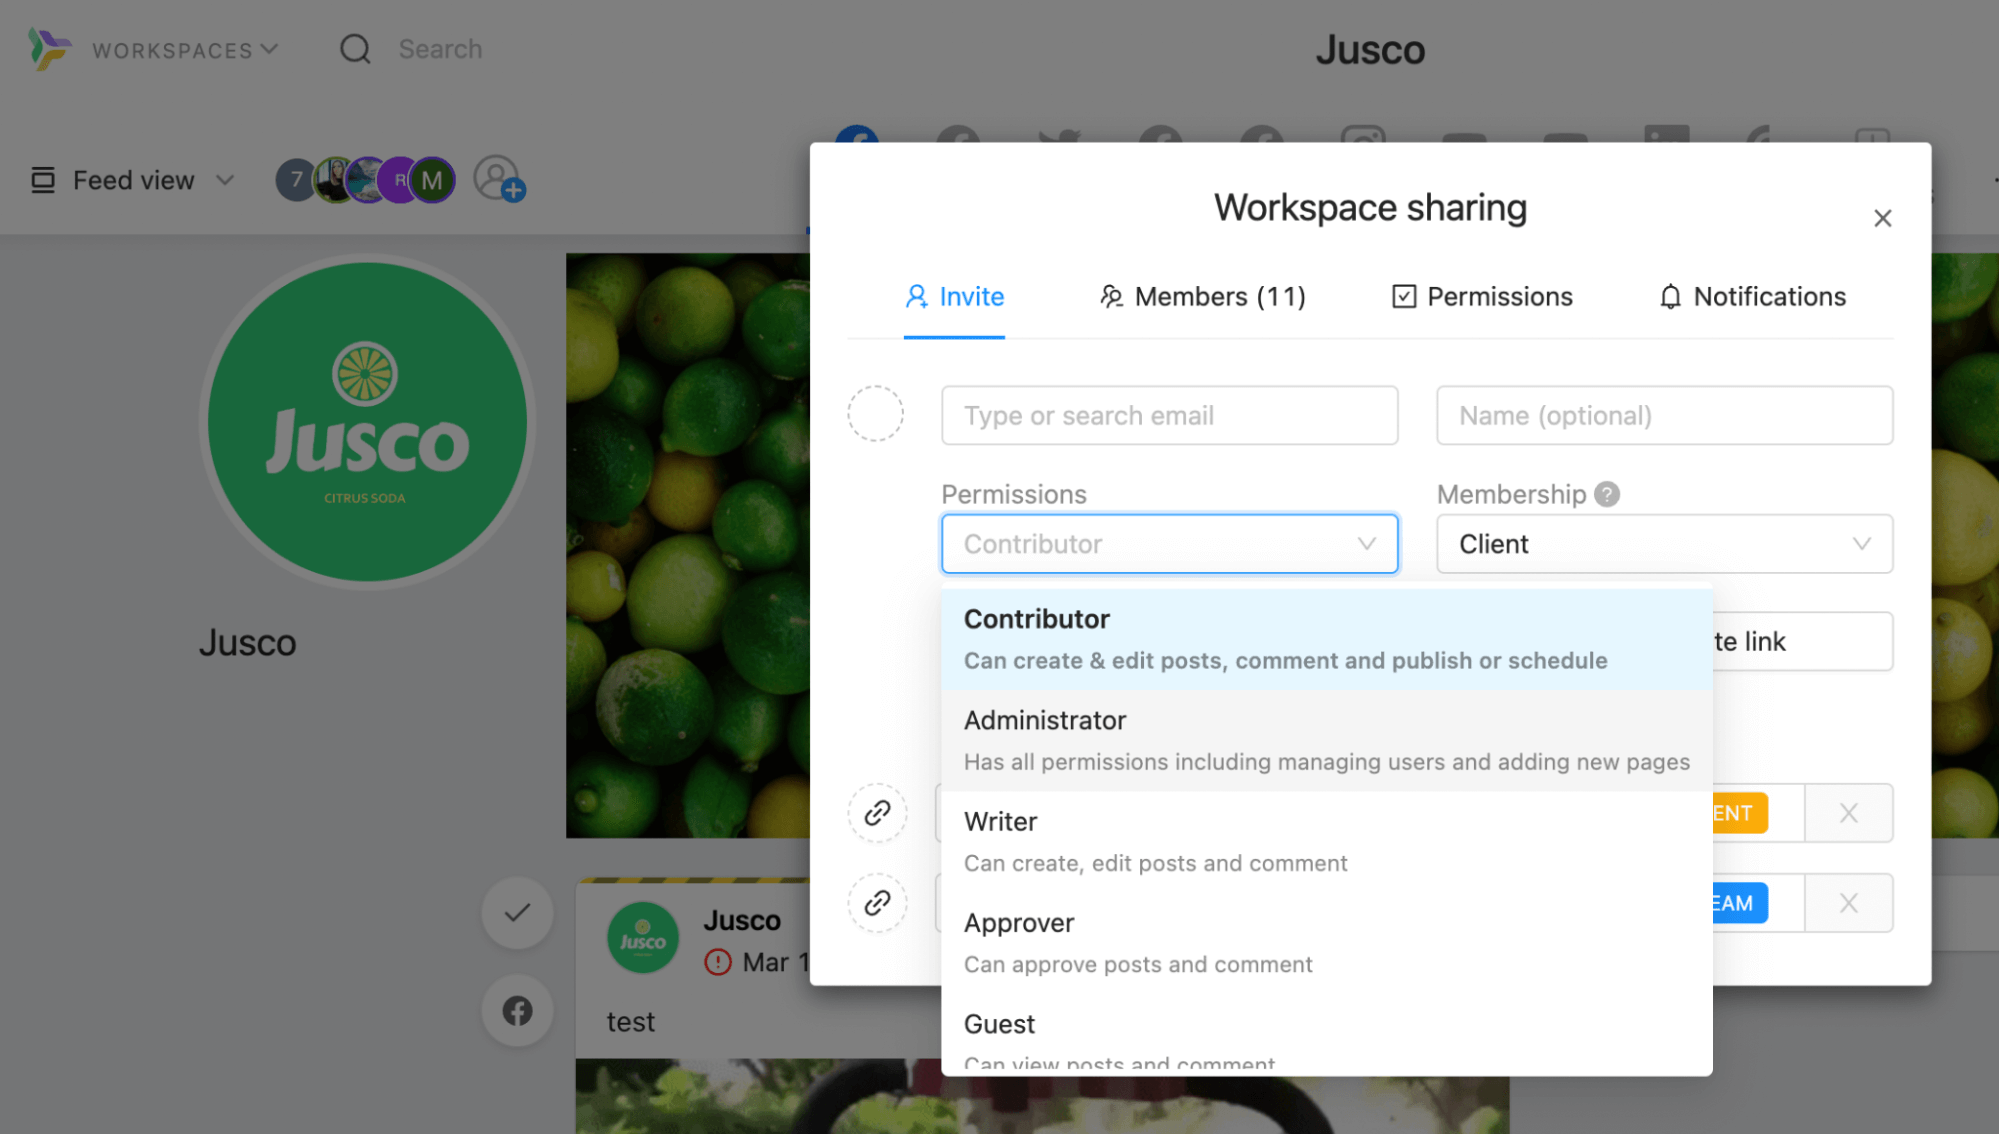 Workspace sharing settings with Invitation options for permission roles such as Contributor, Administrator, Writer, Approver, or Guest.